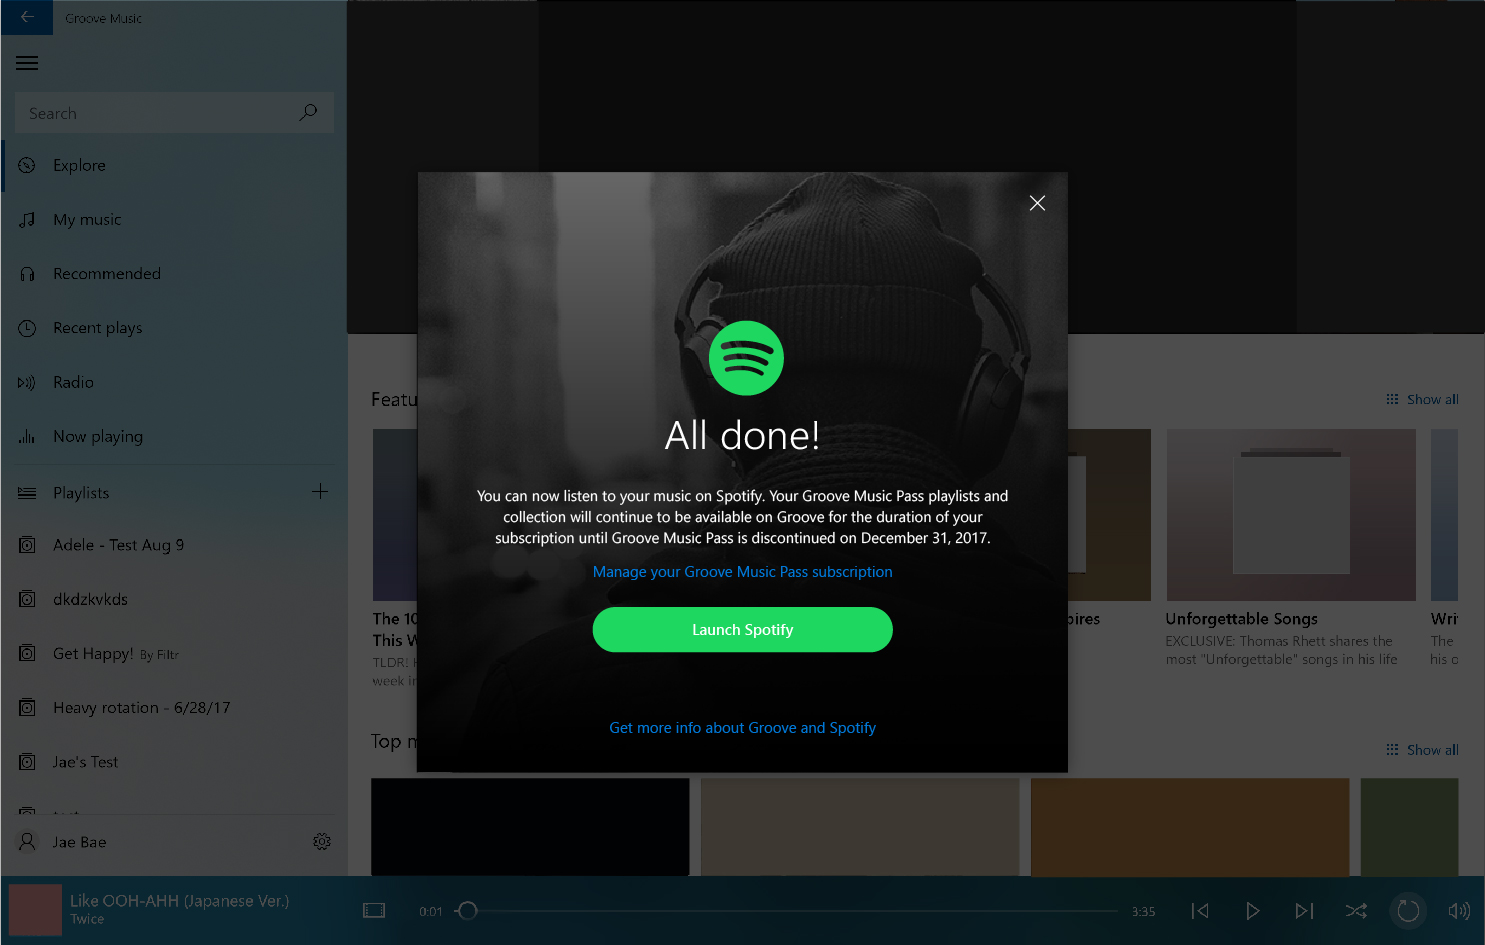 Cortana Suddenly Tries to Access Groove Music Instead of Spotify baf1e838c109b865374dbfbe71143d00.jpg